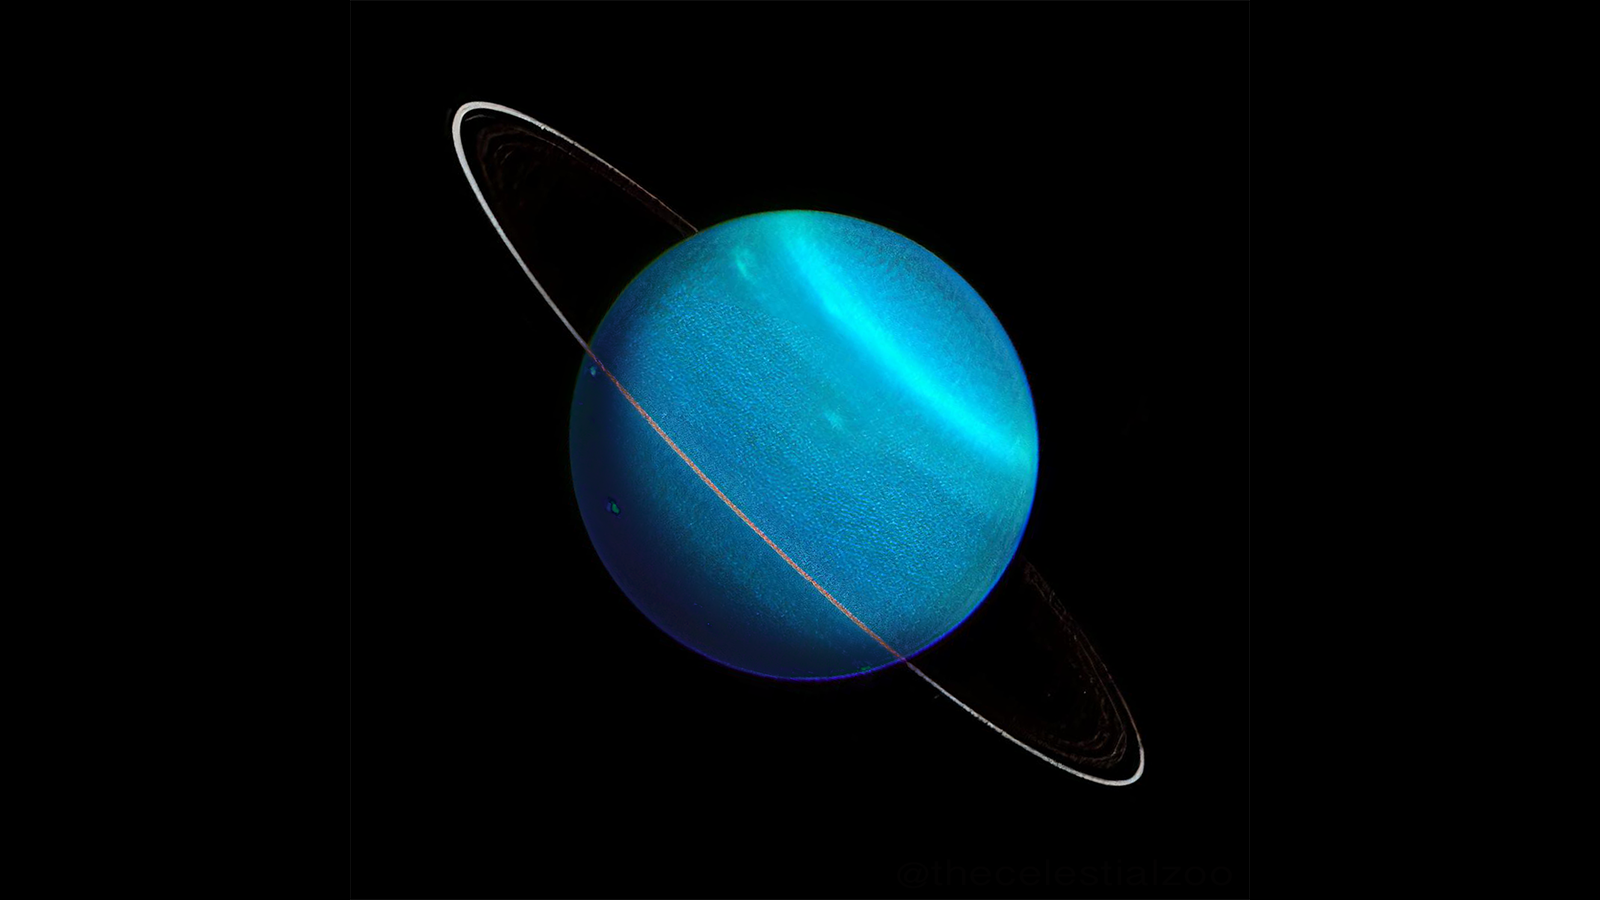 Astronomers have a new theory for why Uranus spins on its side